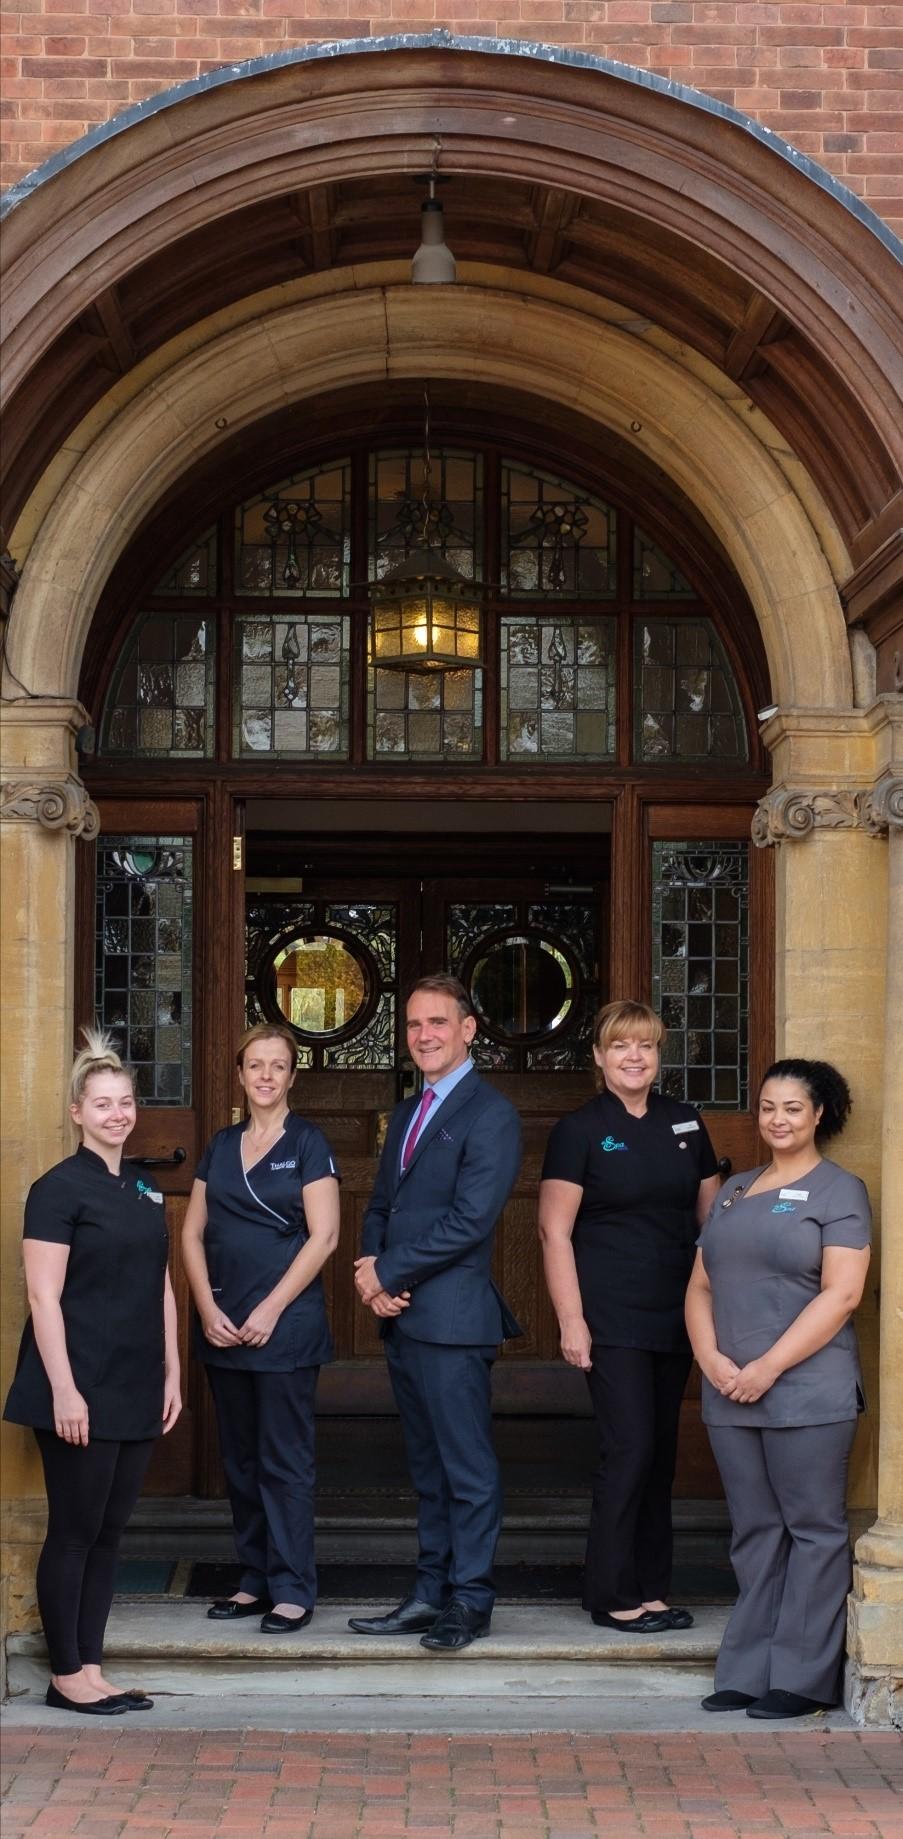 A warm welcome to The Spa at Moor Hall.